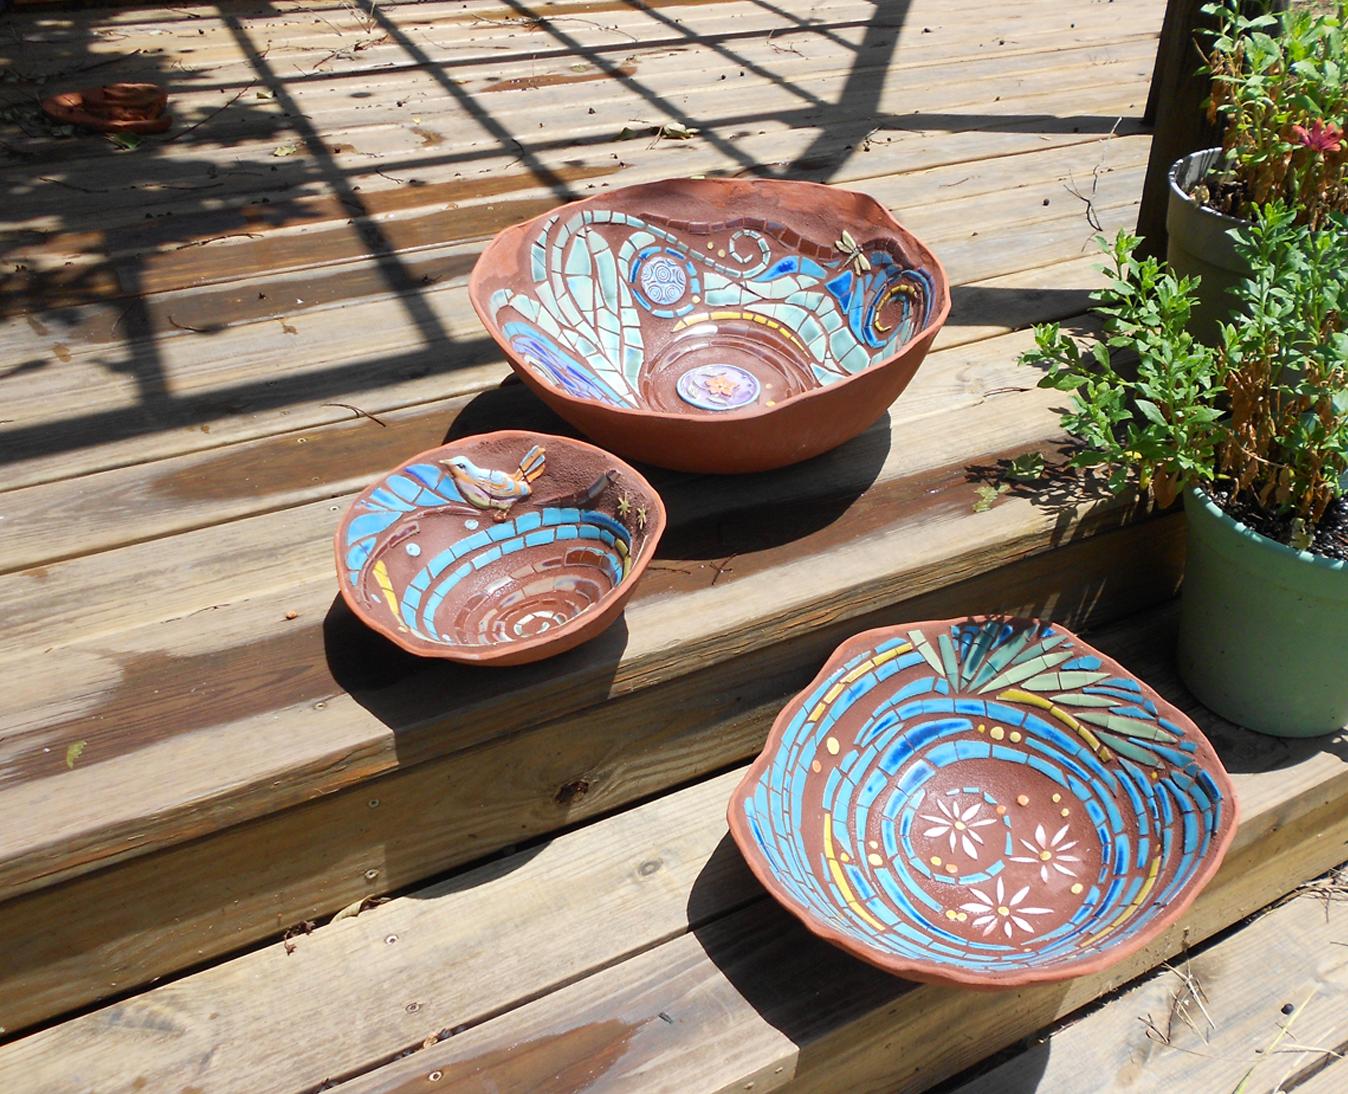 Hand formed terra cotta vessels with mosaic interior surface.